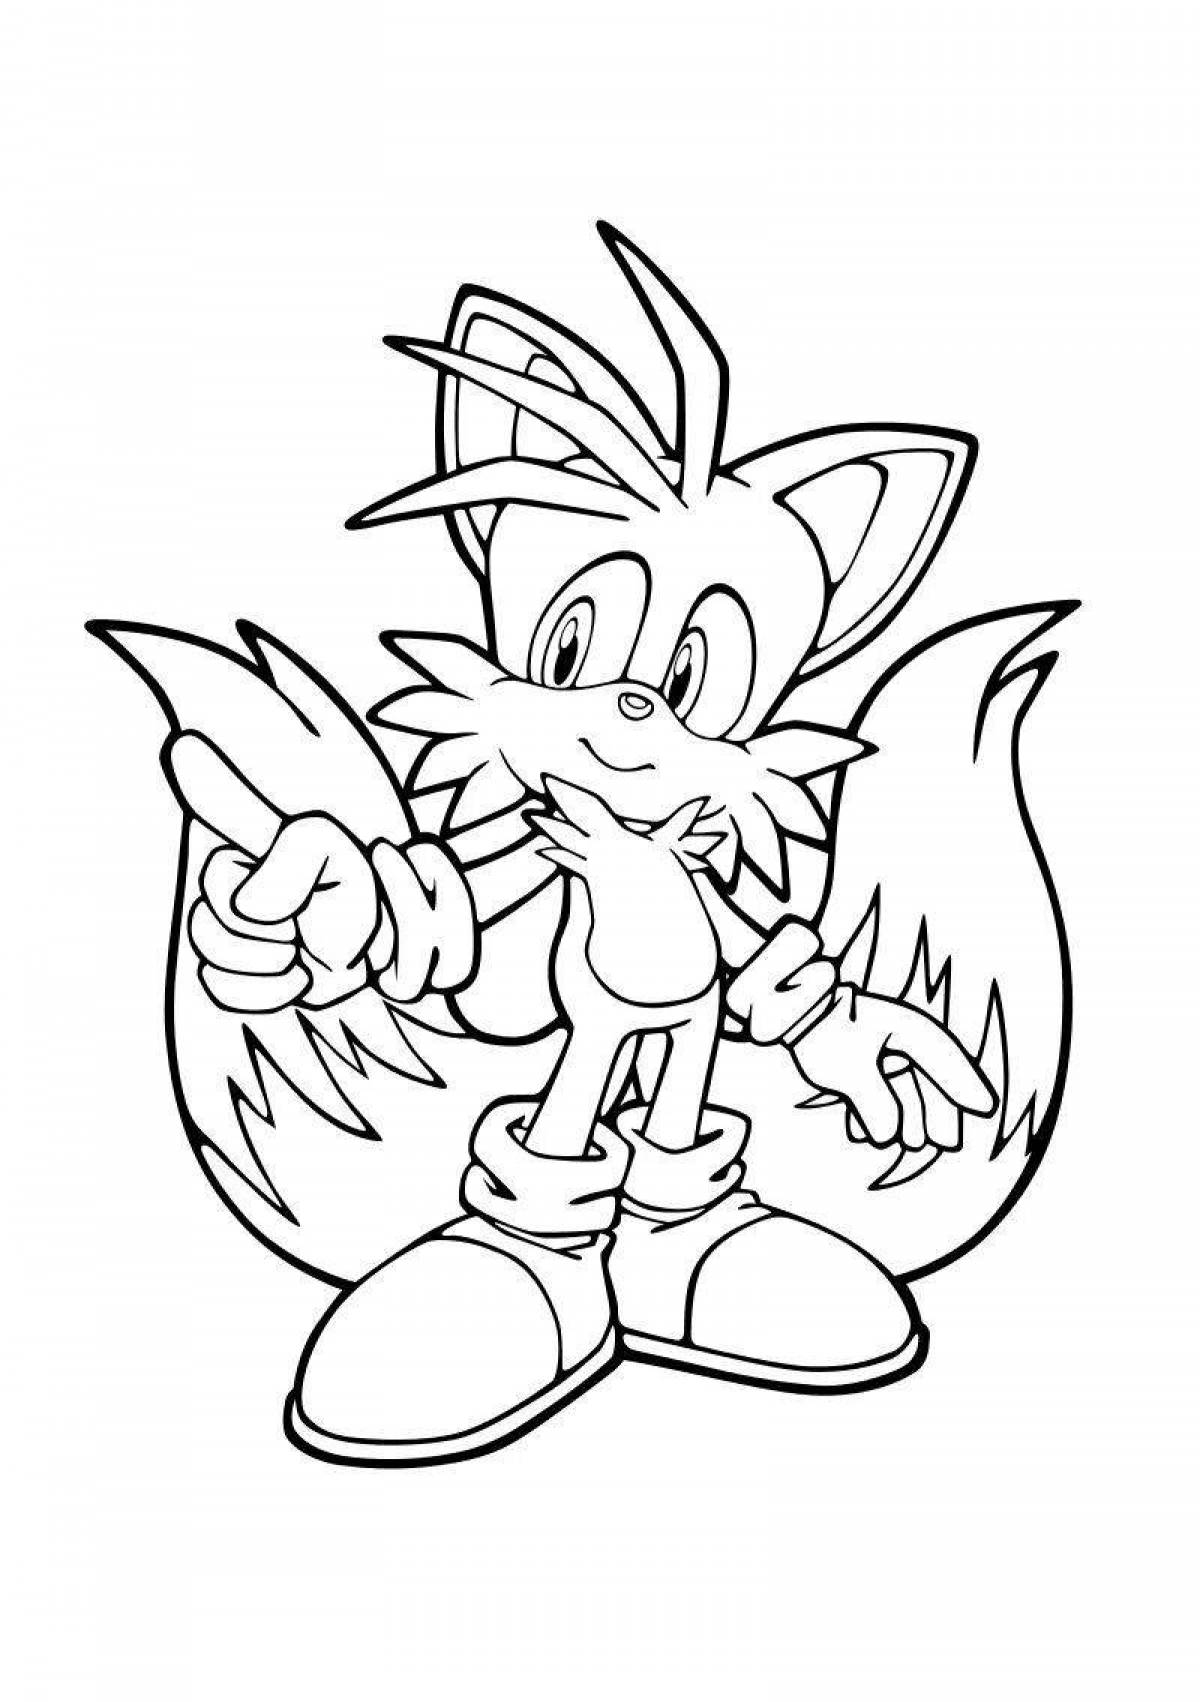 Animated sonic seal coloring page